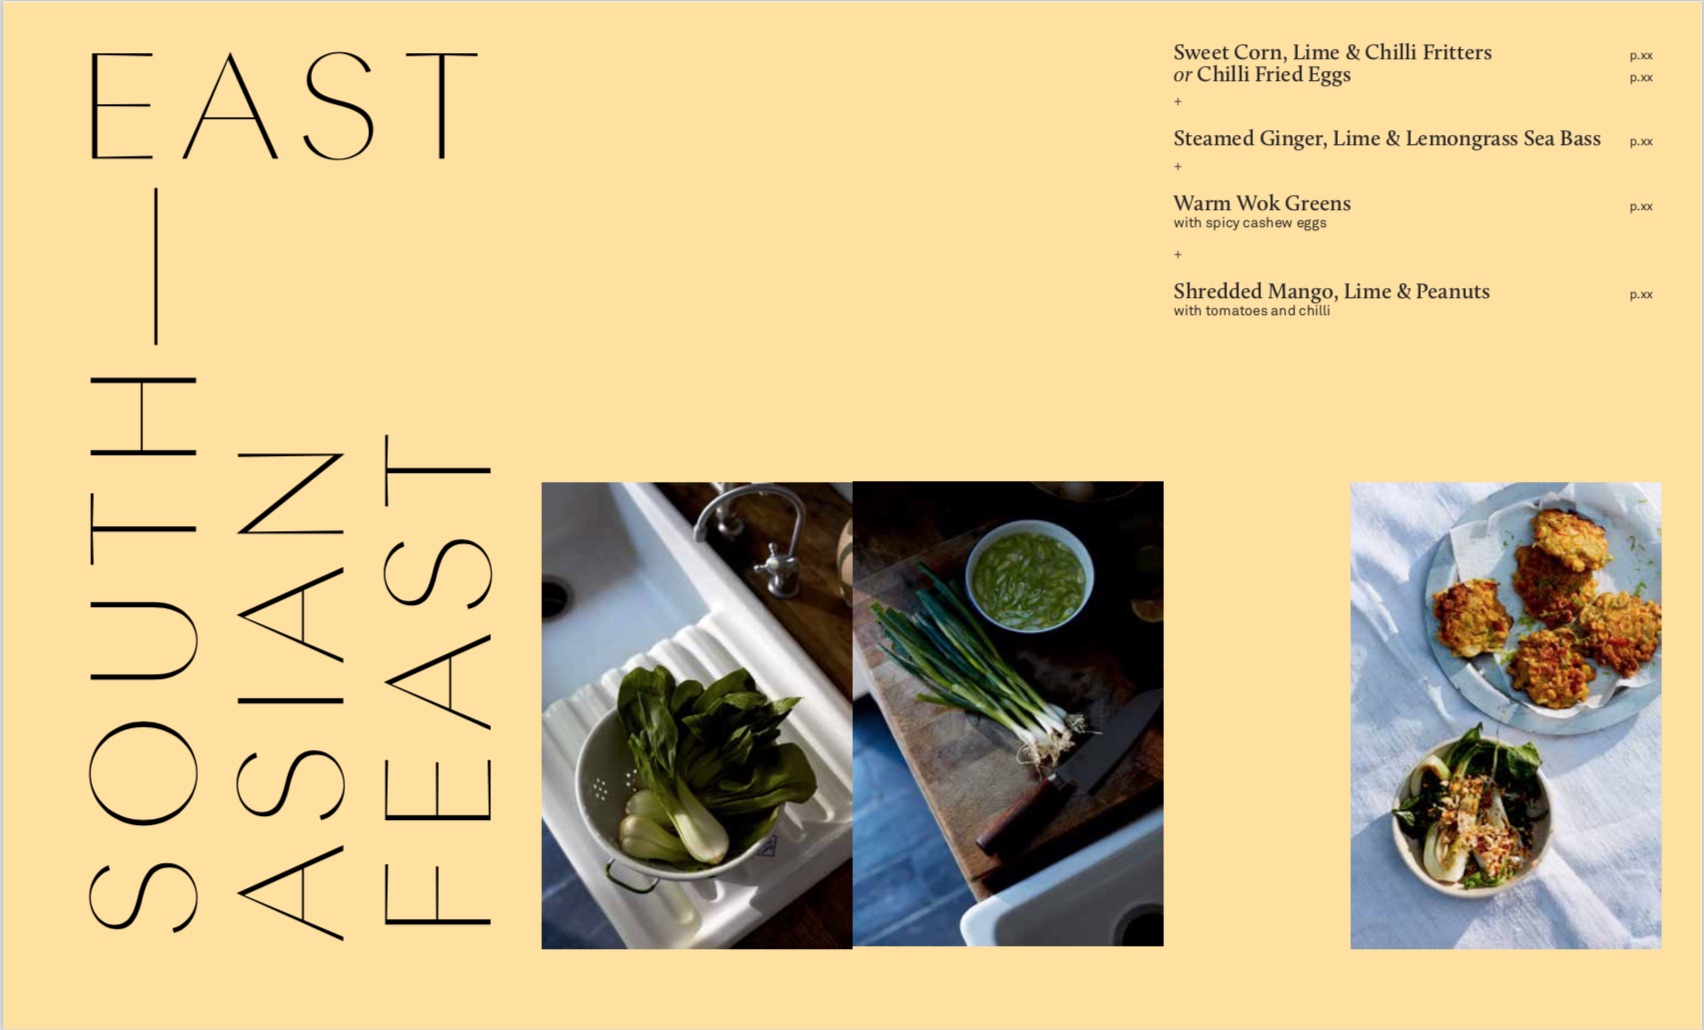 By Jessica Elliott Dennison from Salad Feasts: How to assemble the perfect meal copyright Hardie Grant Books 2018